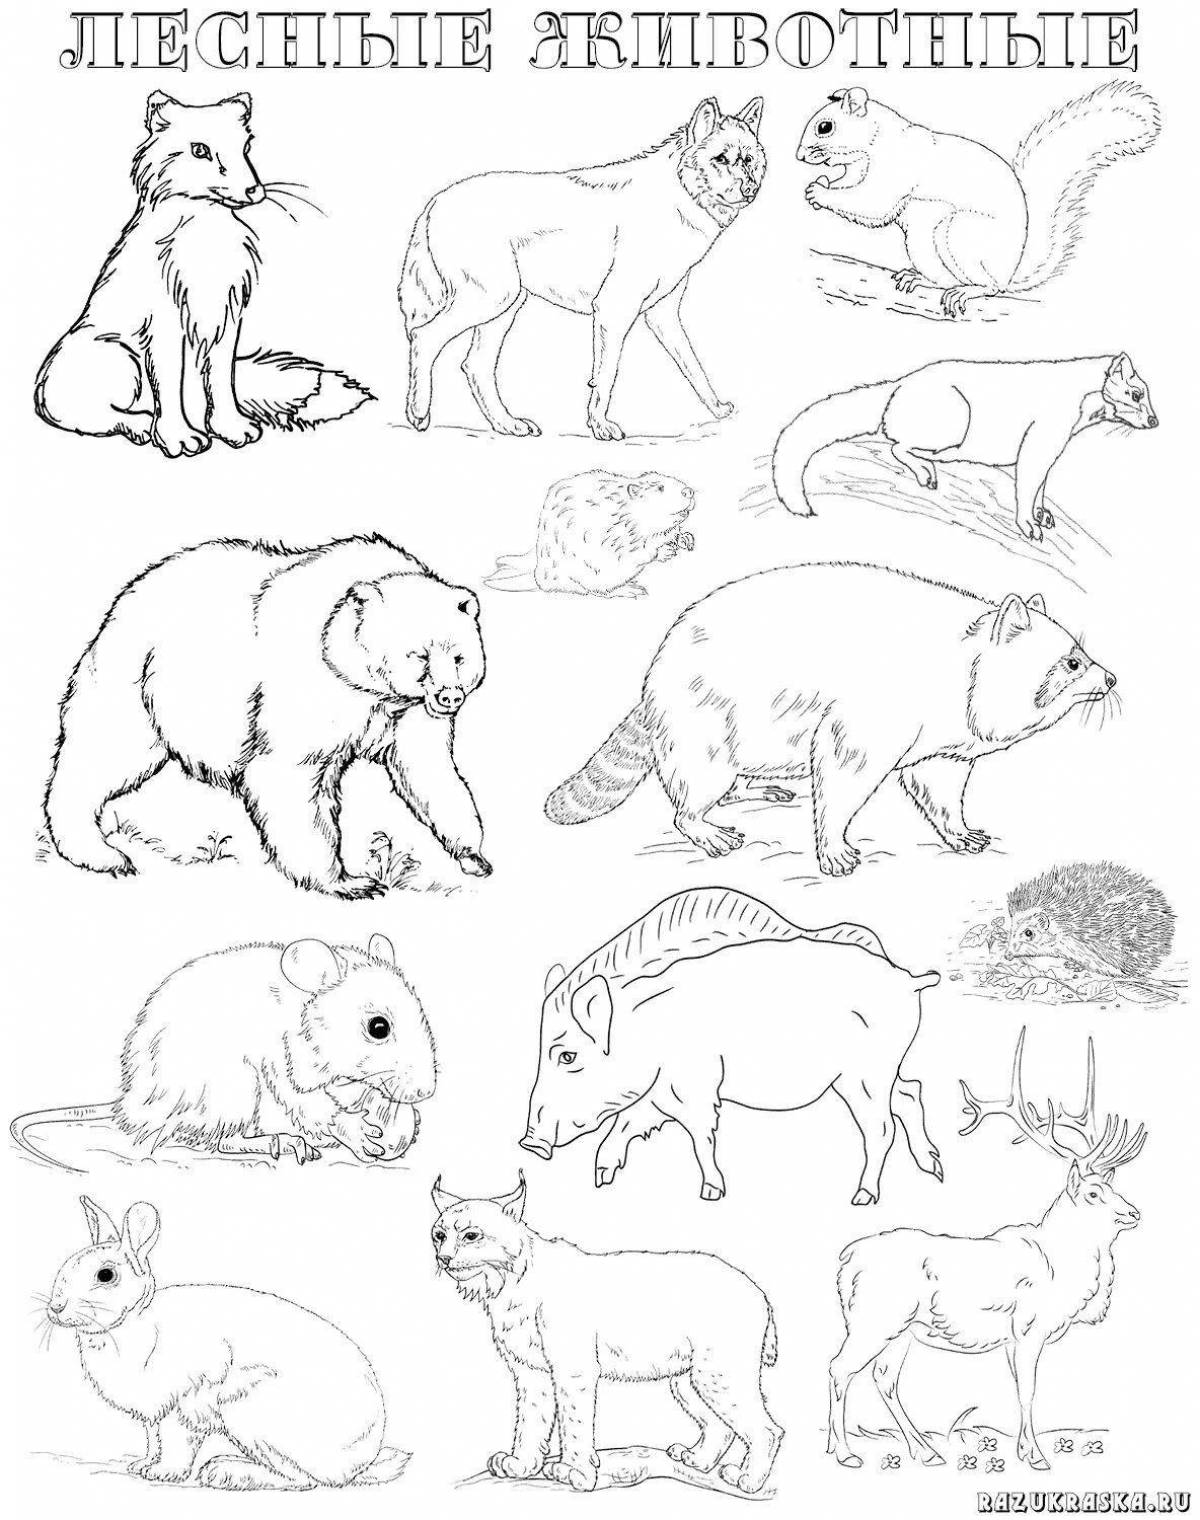 Awesome wild animal coloring pages for ages 5-6